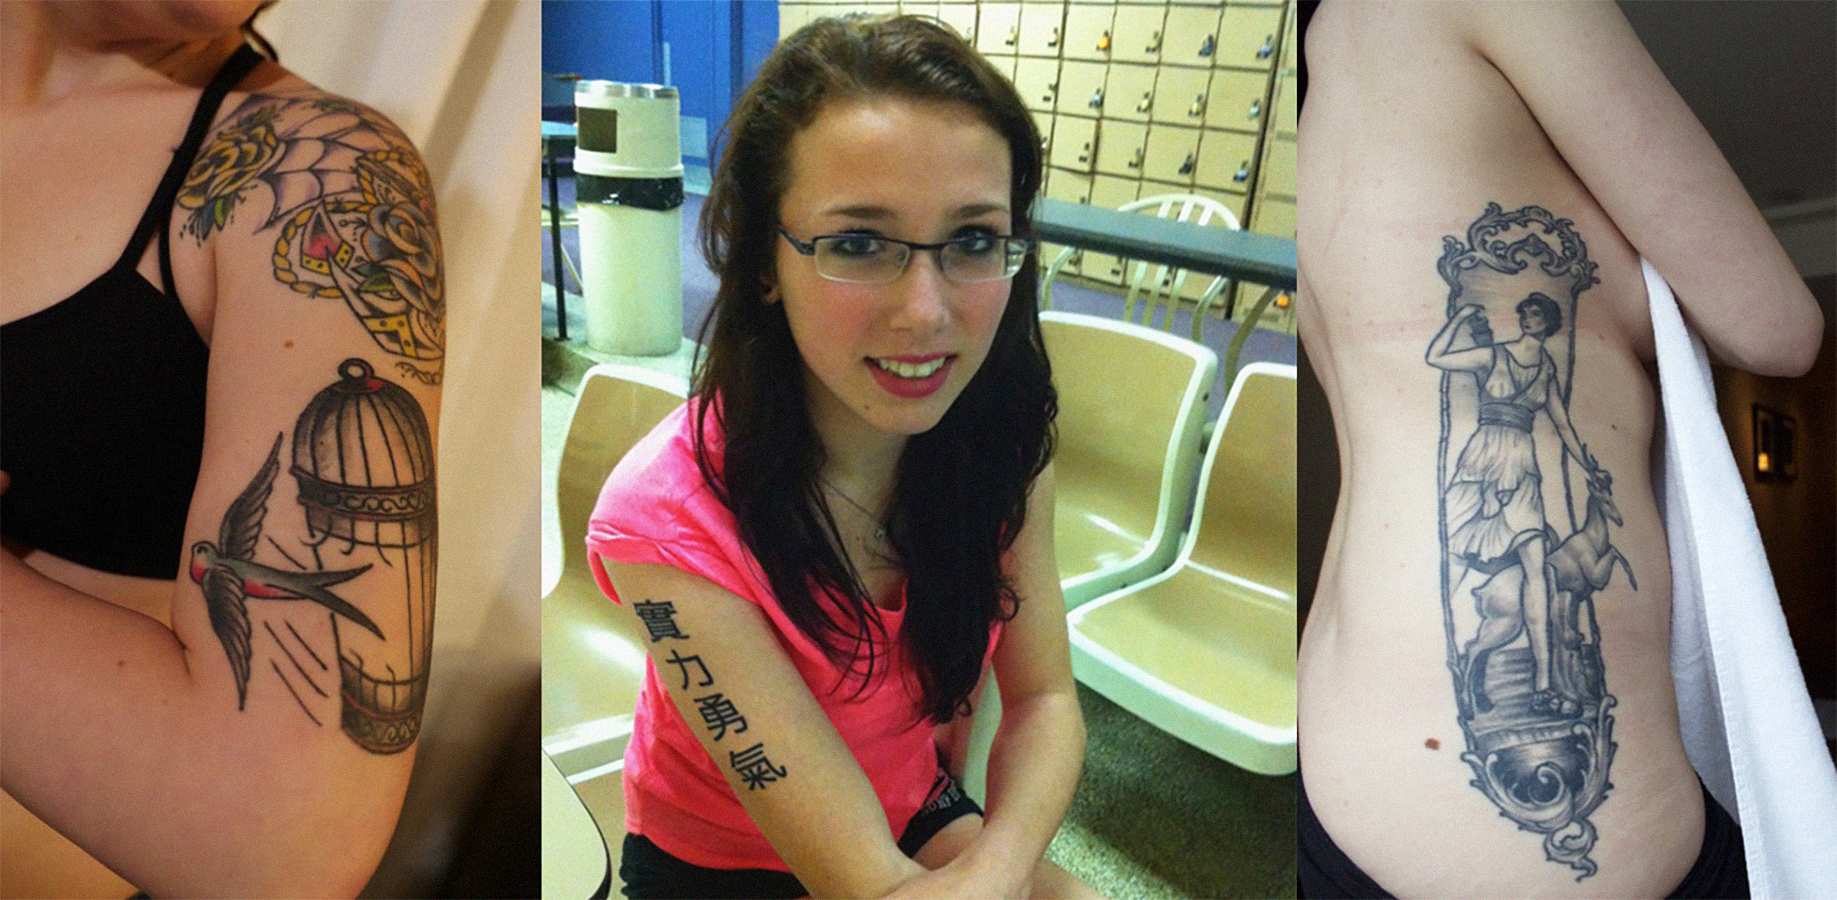 NSVRC - Check out these empowering survivor tattoo designs. | Facebook